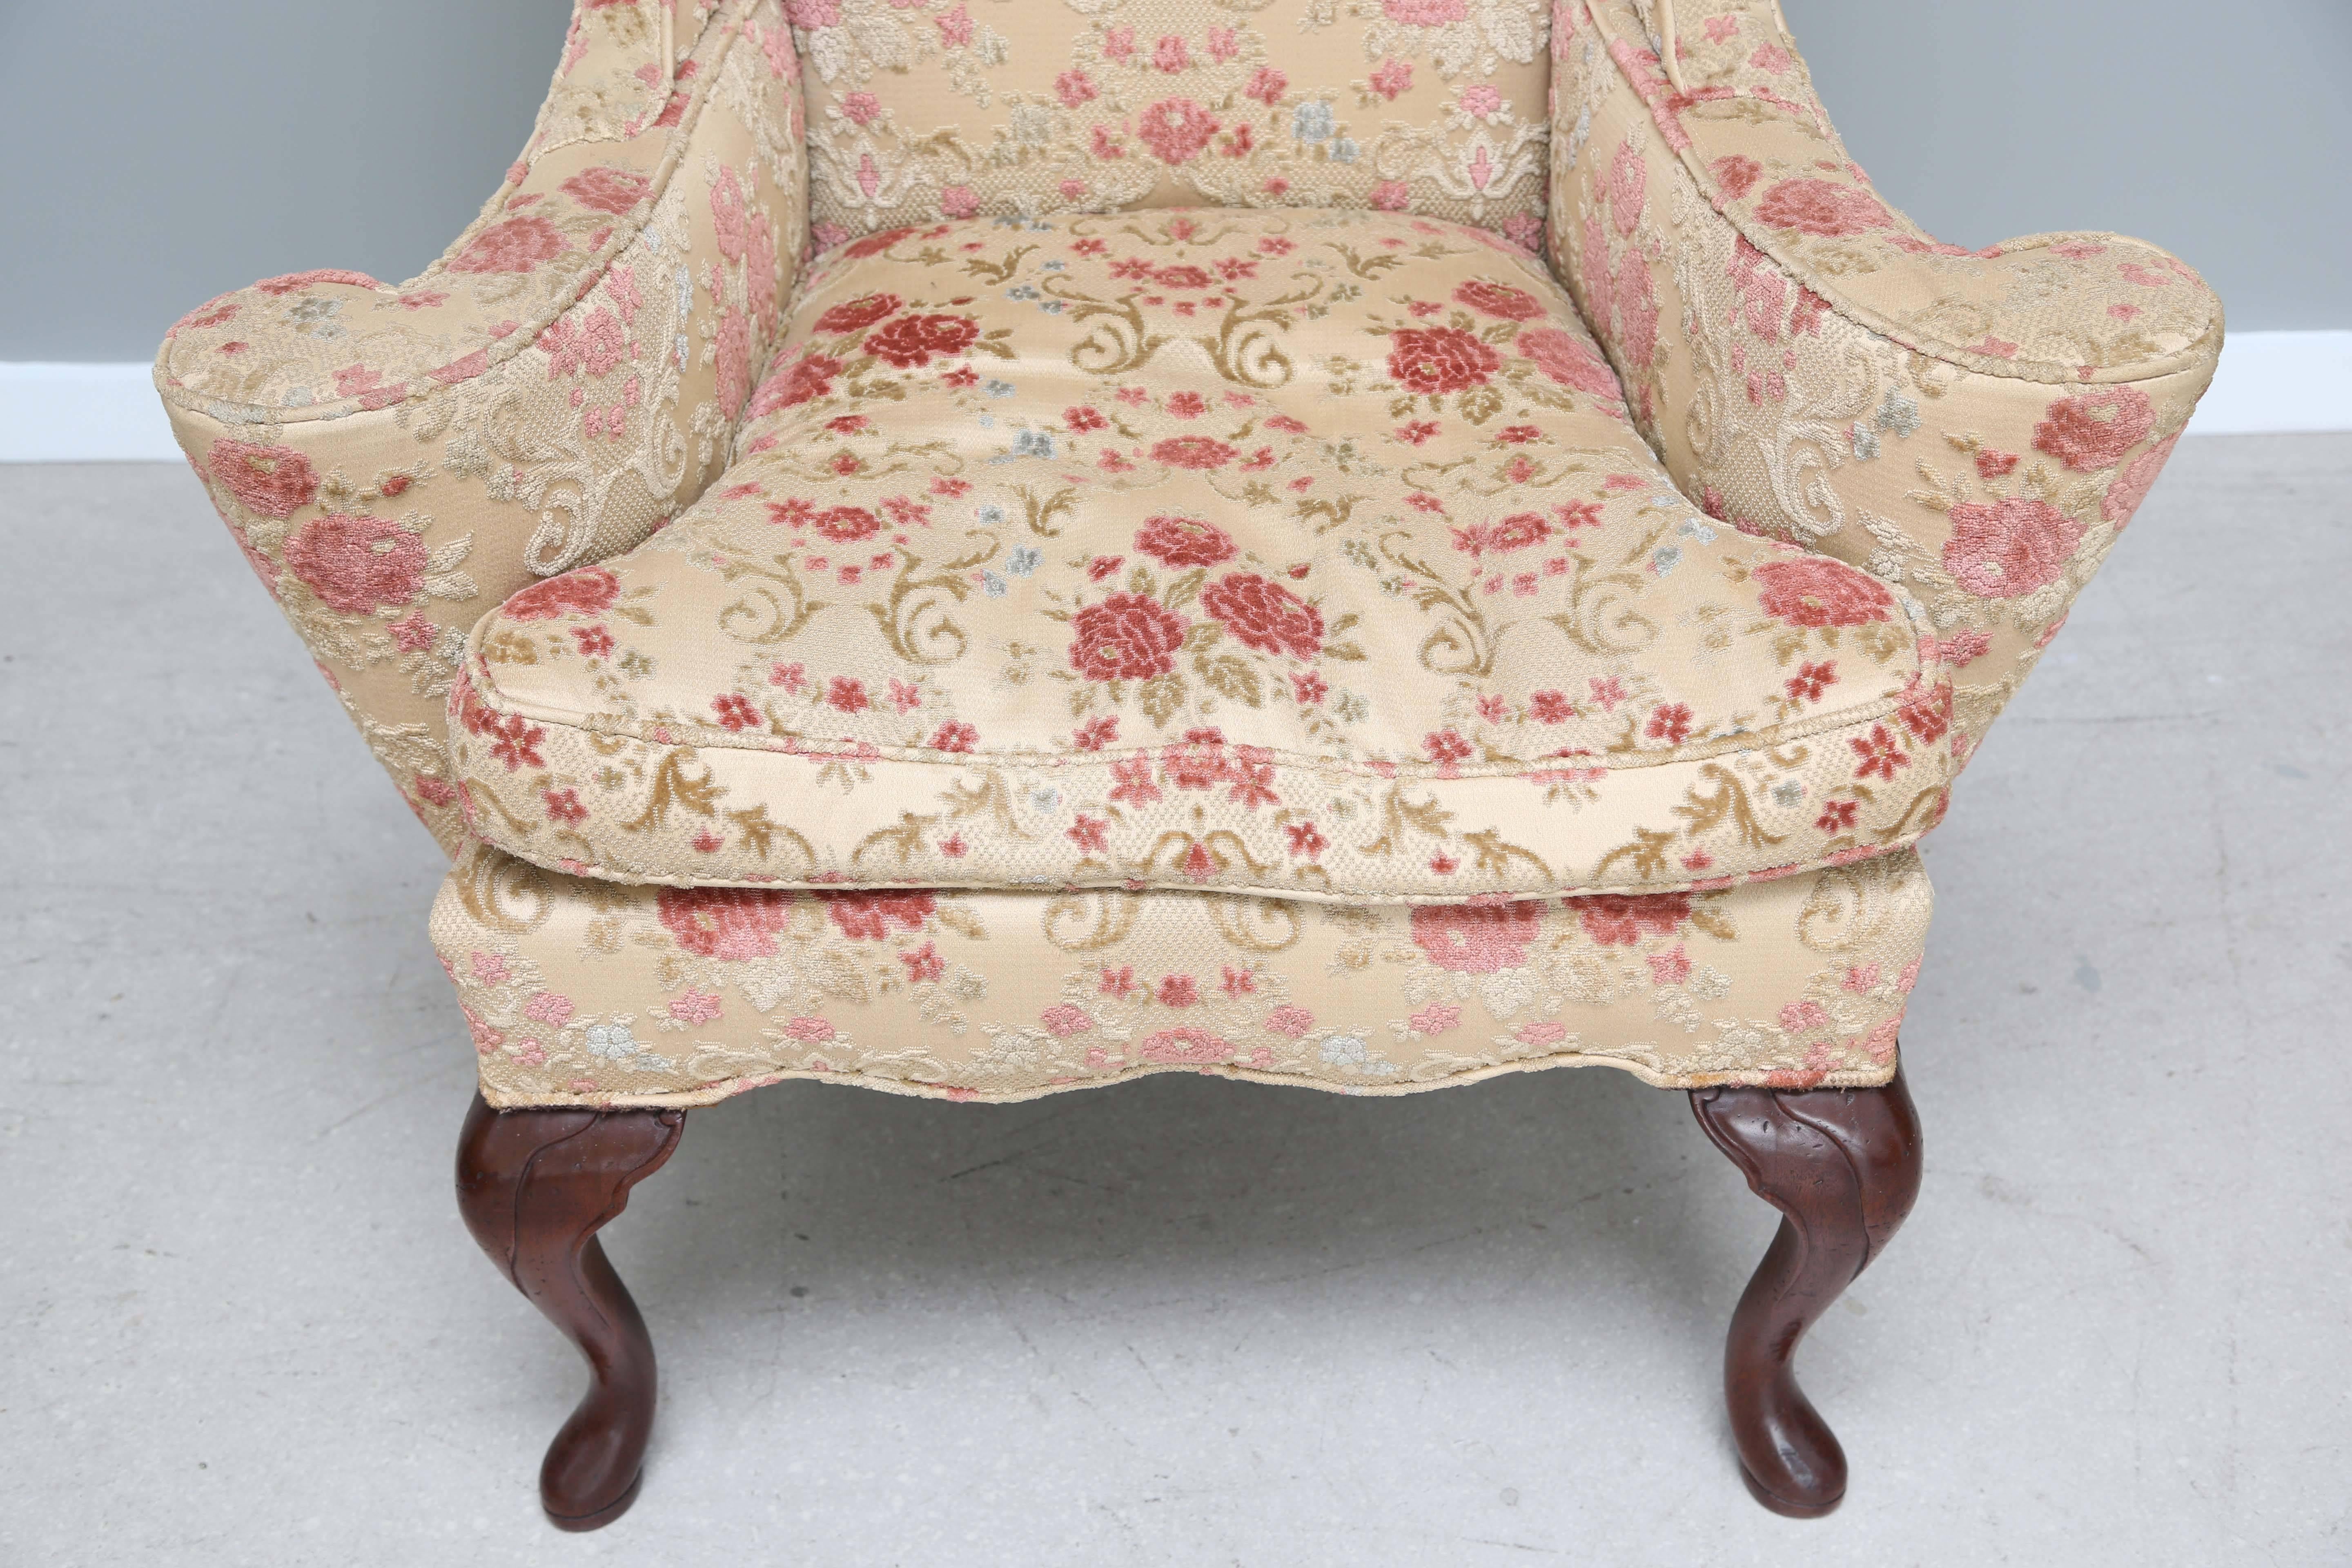 Dynamic Queen Anne Style Chair with Floral Upholstery In Good Condition For Sale In West Palm Beach, FL